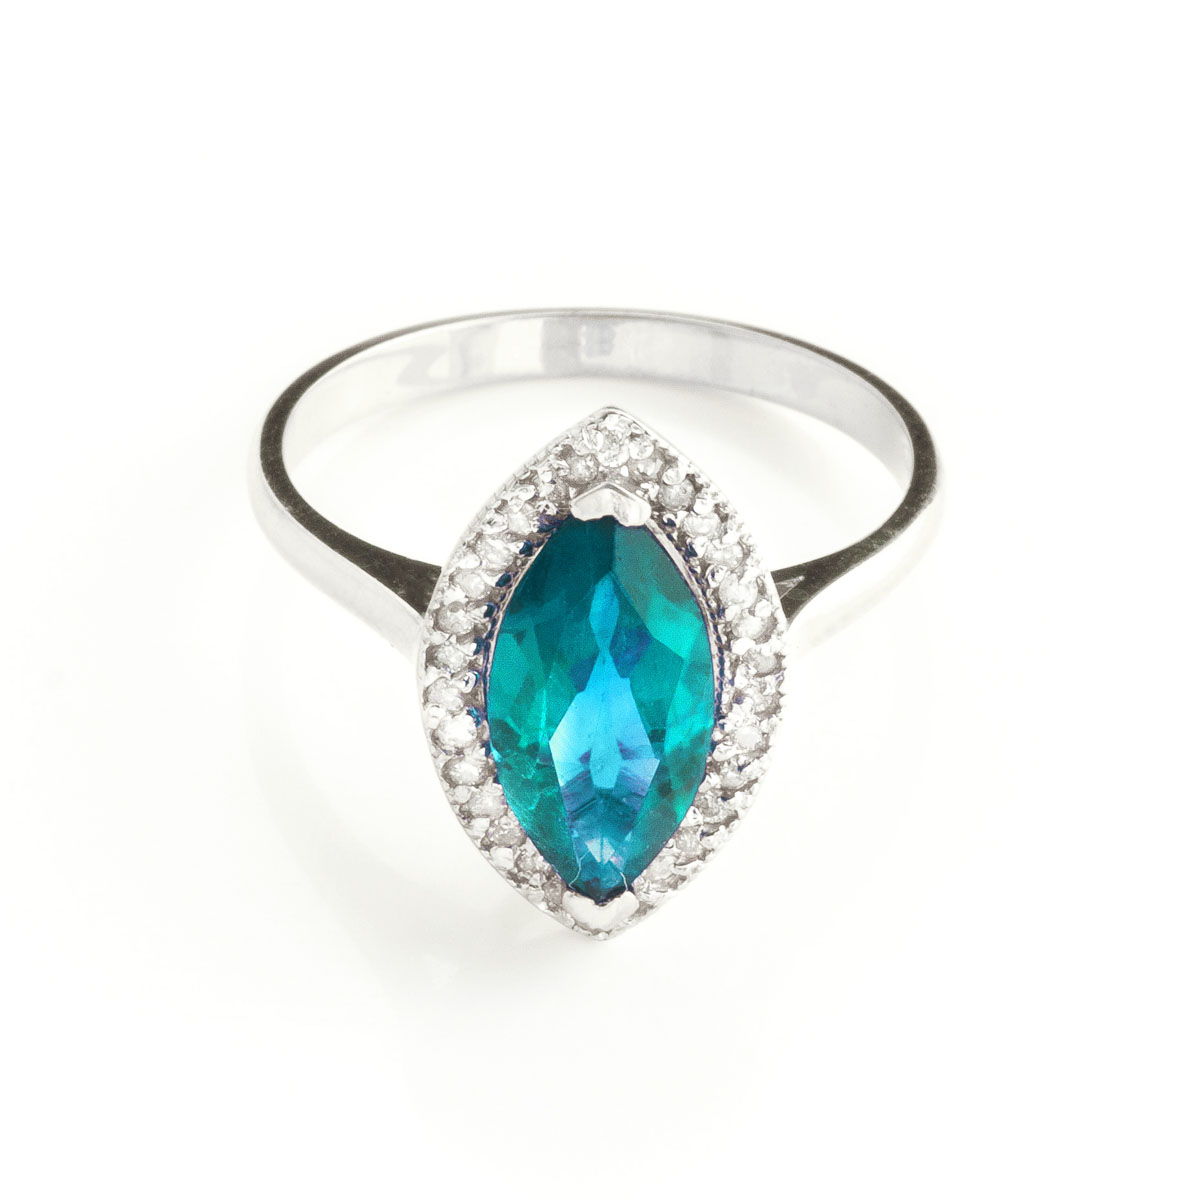 Blue Topaz Halo Ring 2.4 ctw in Sterling Silver